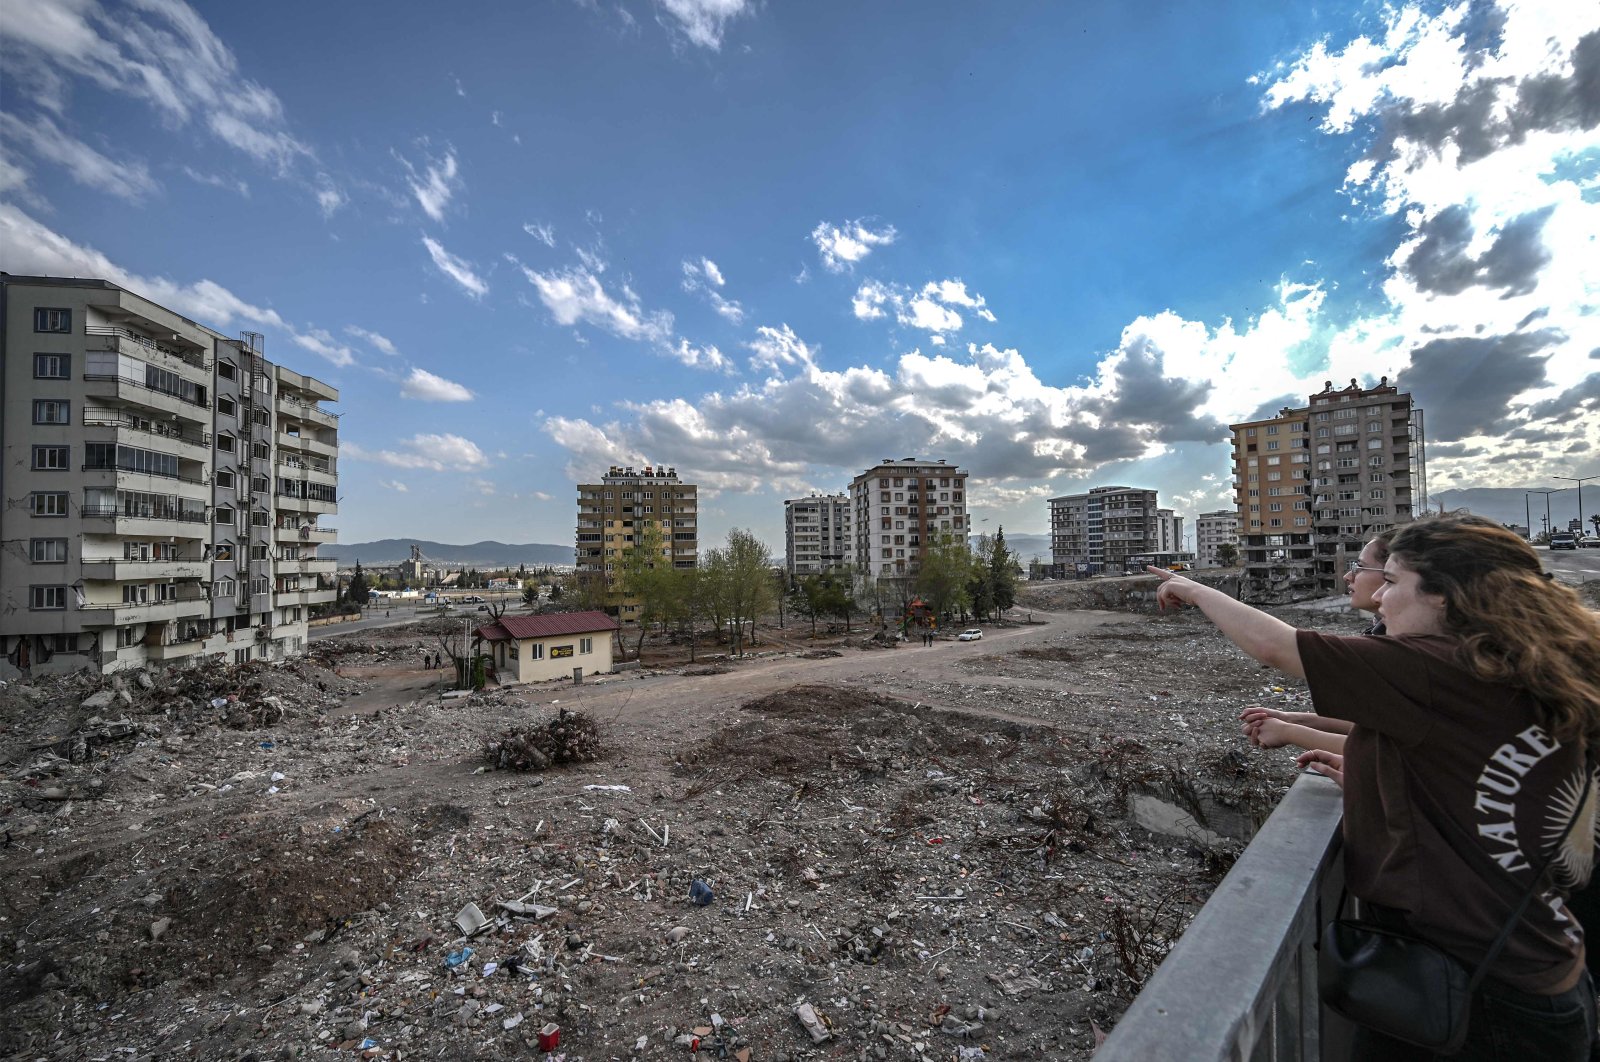 A vacant plot is formed after the removal of rubble from collapsed buildings at the Ebrar site in the quake-hit city of Kahramanmaraş, Türkiye, April 4, 2023. (AFP Photo)